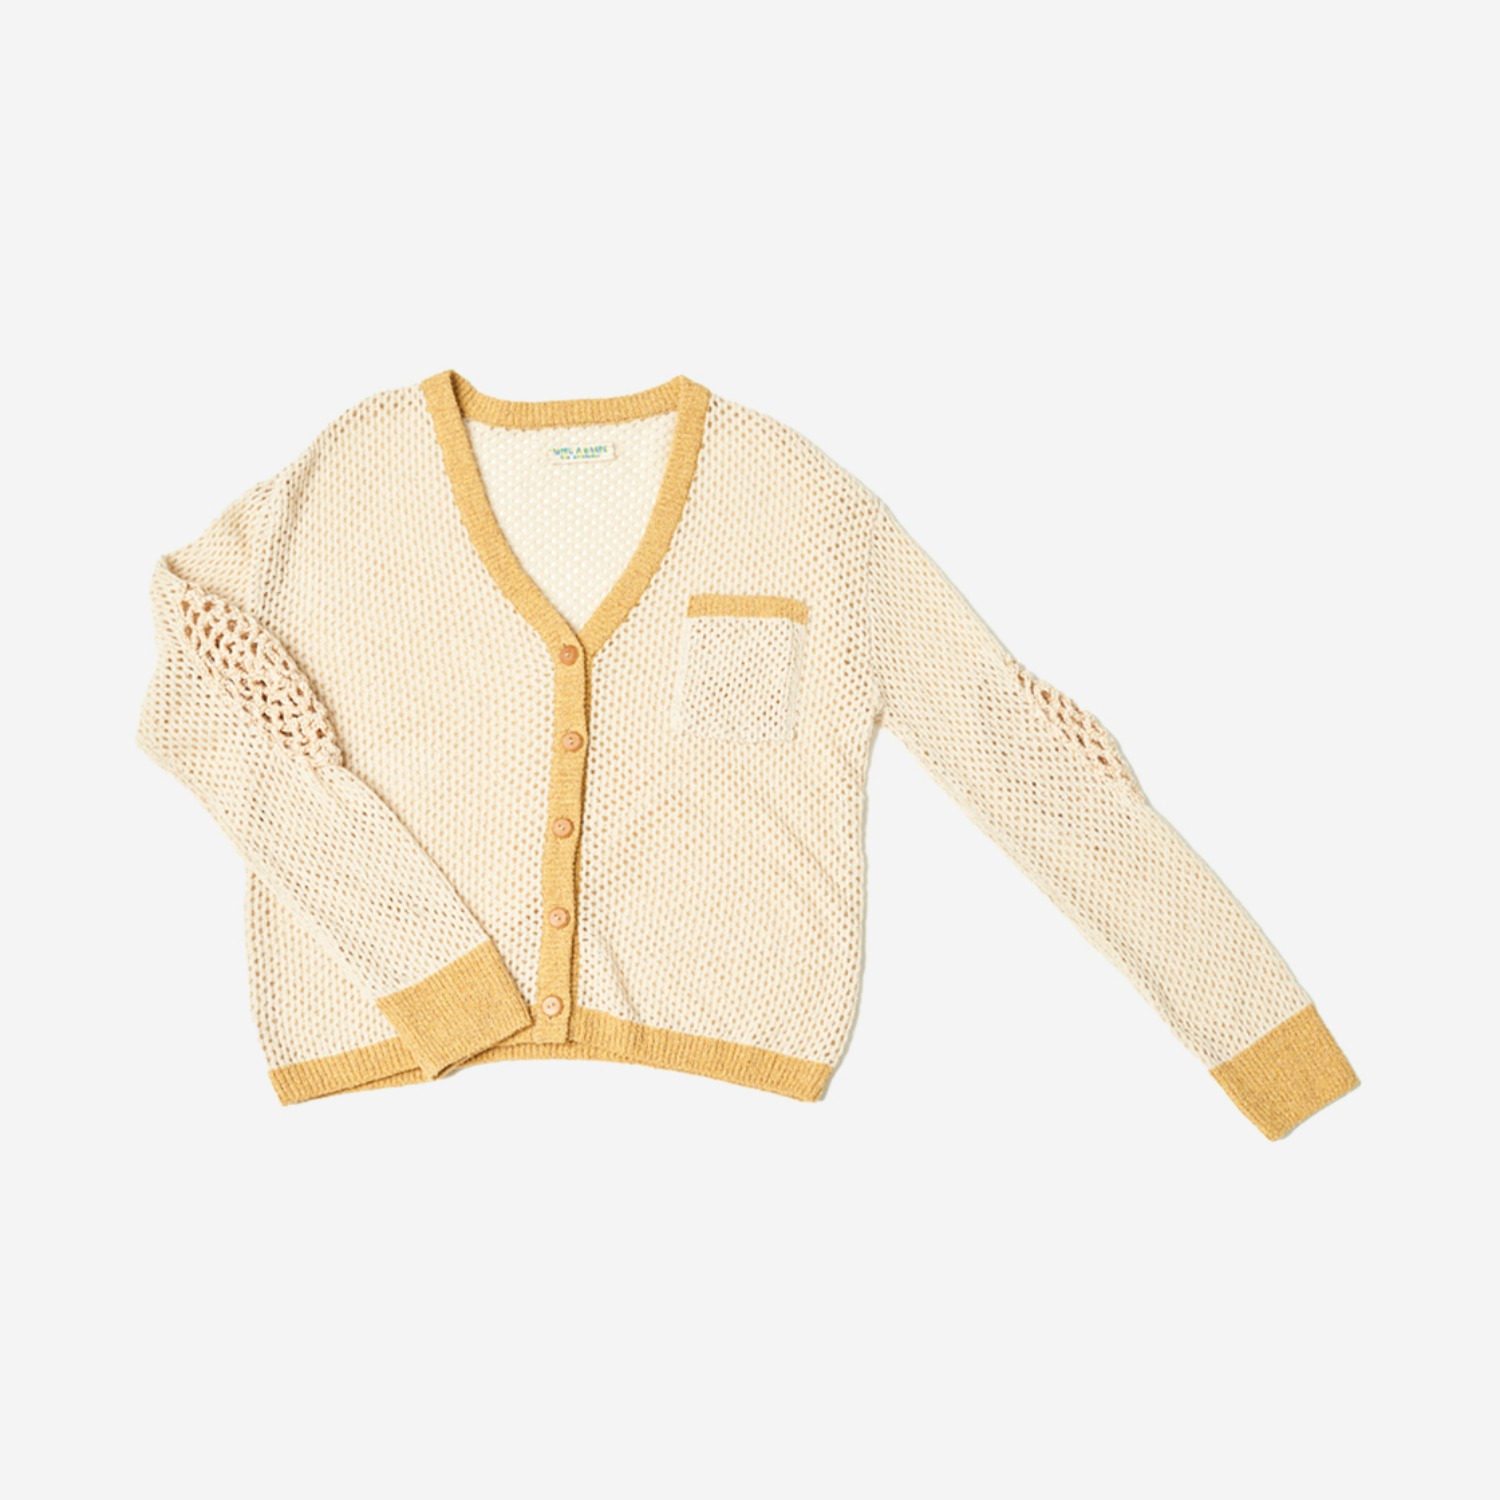 CELL CARDIGAN IVORY